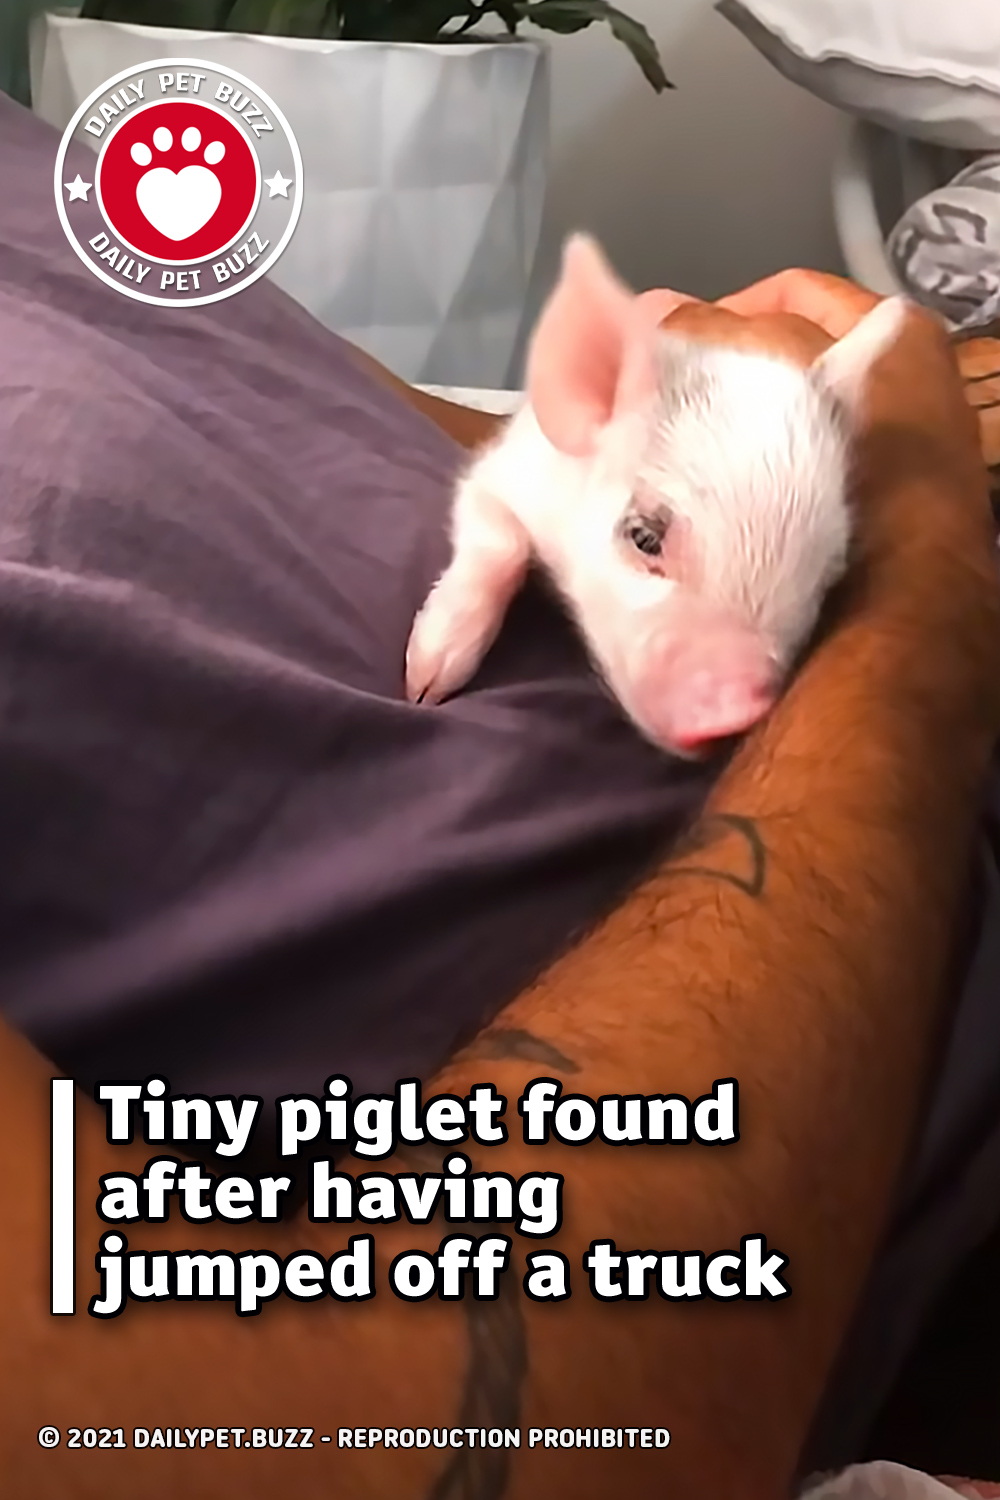 Tiny piglet found after having jumped off a truck